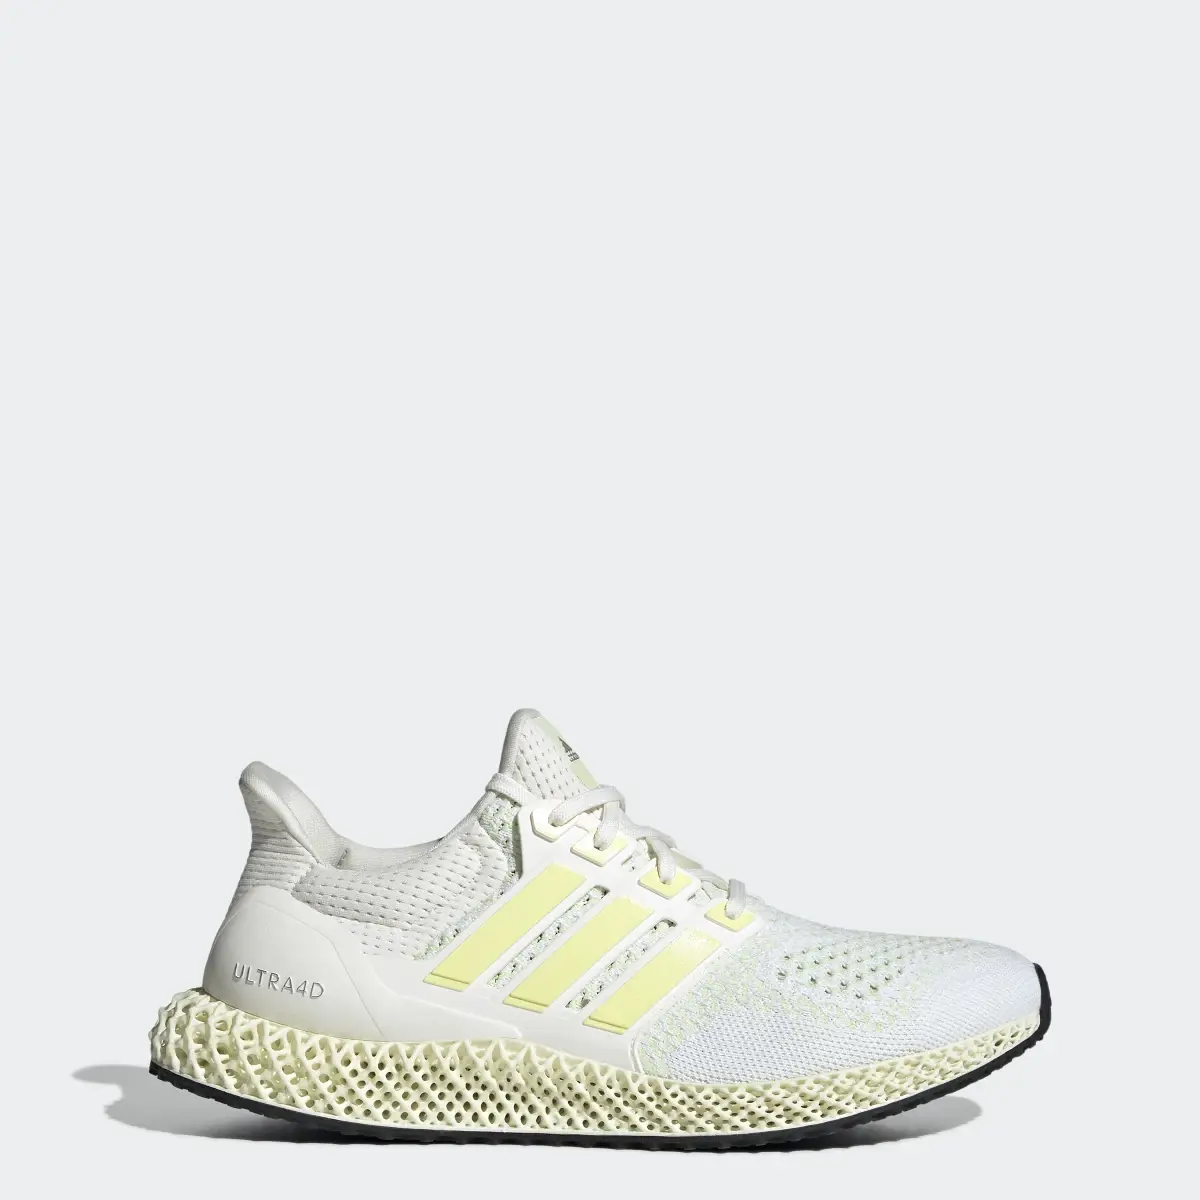 Adidas Ultra 4D Shoes. 1